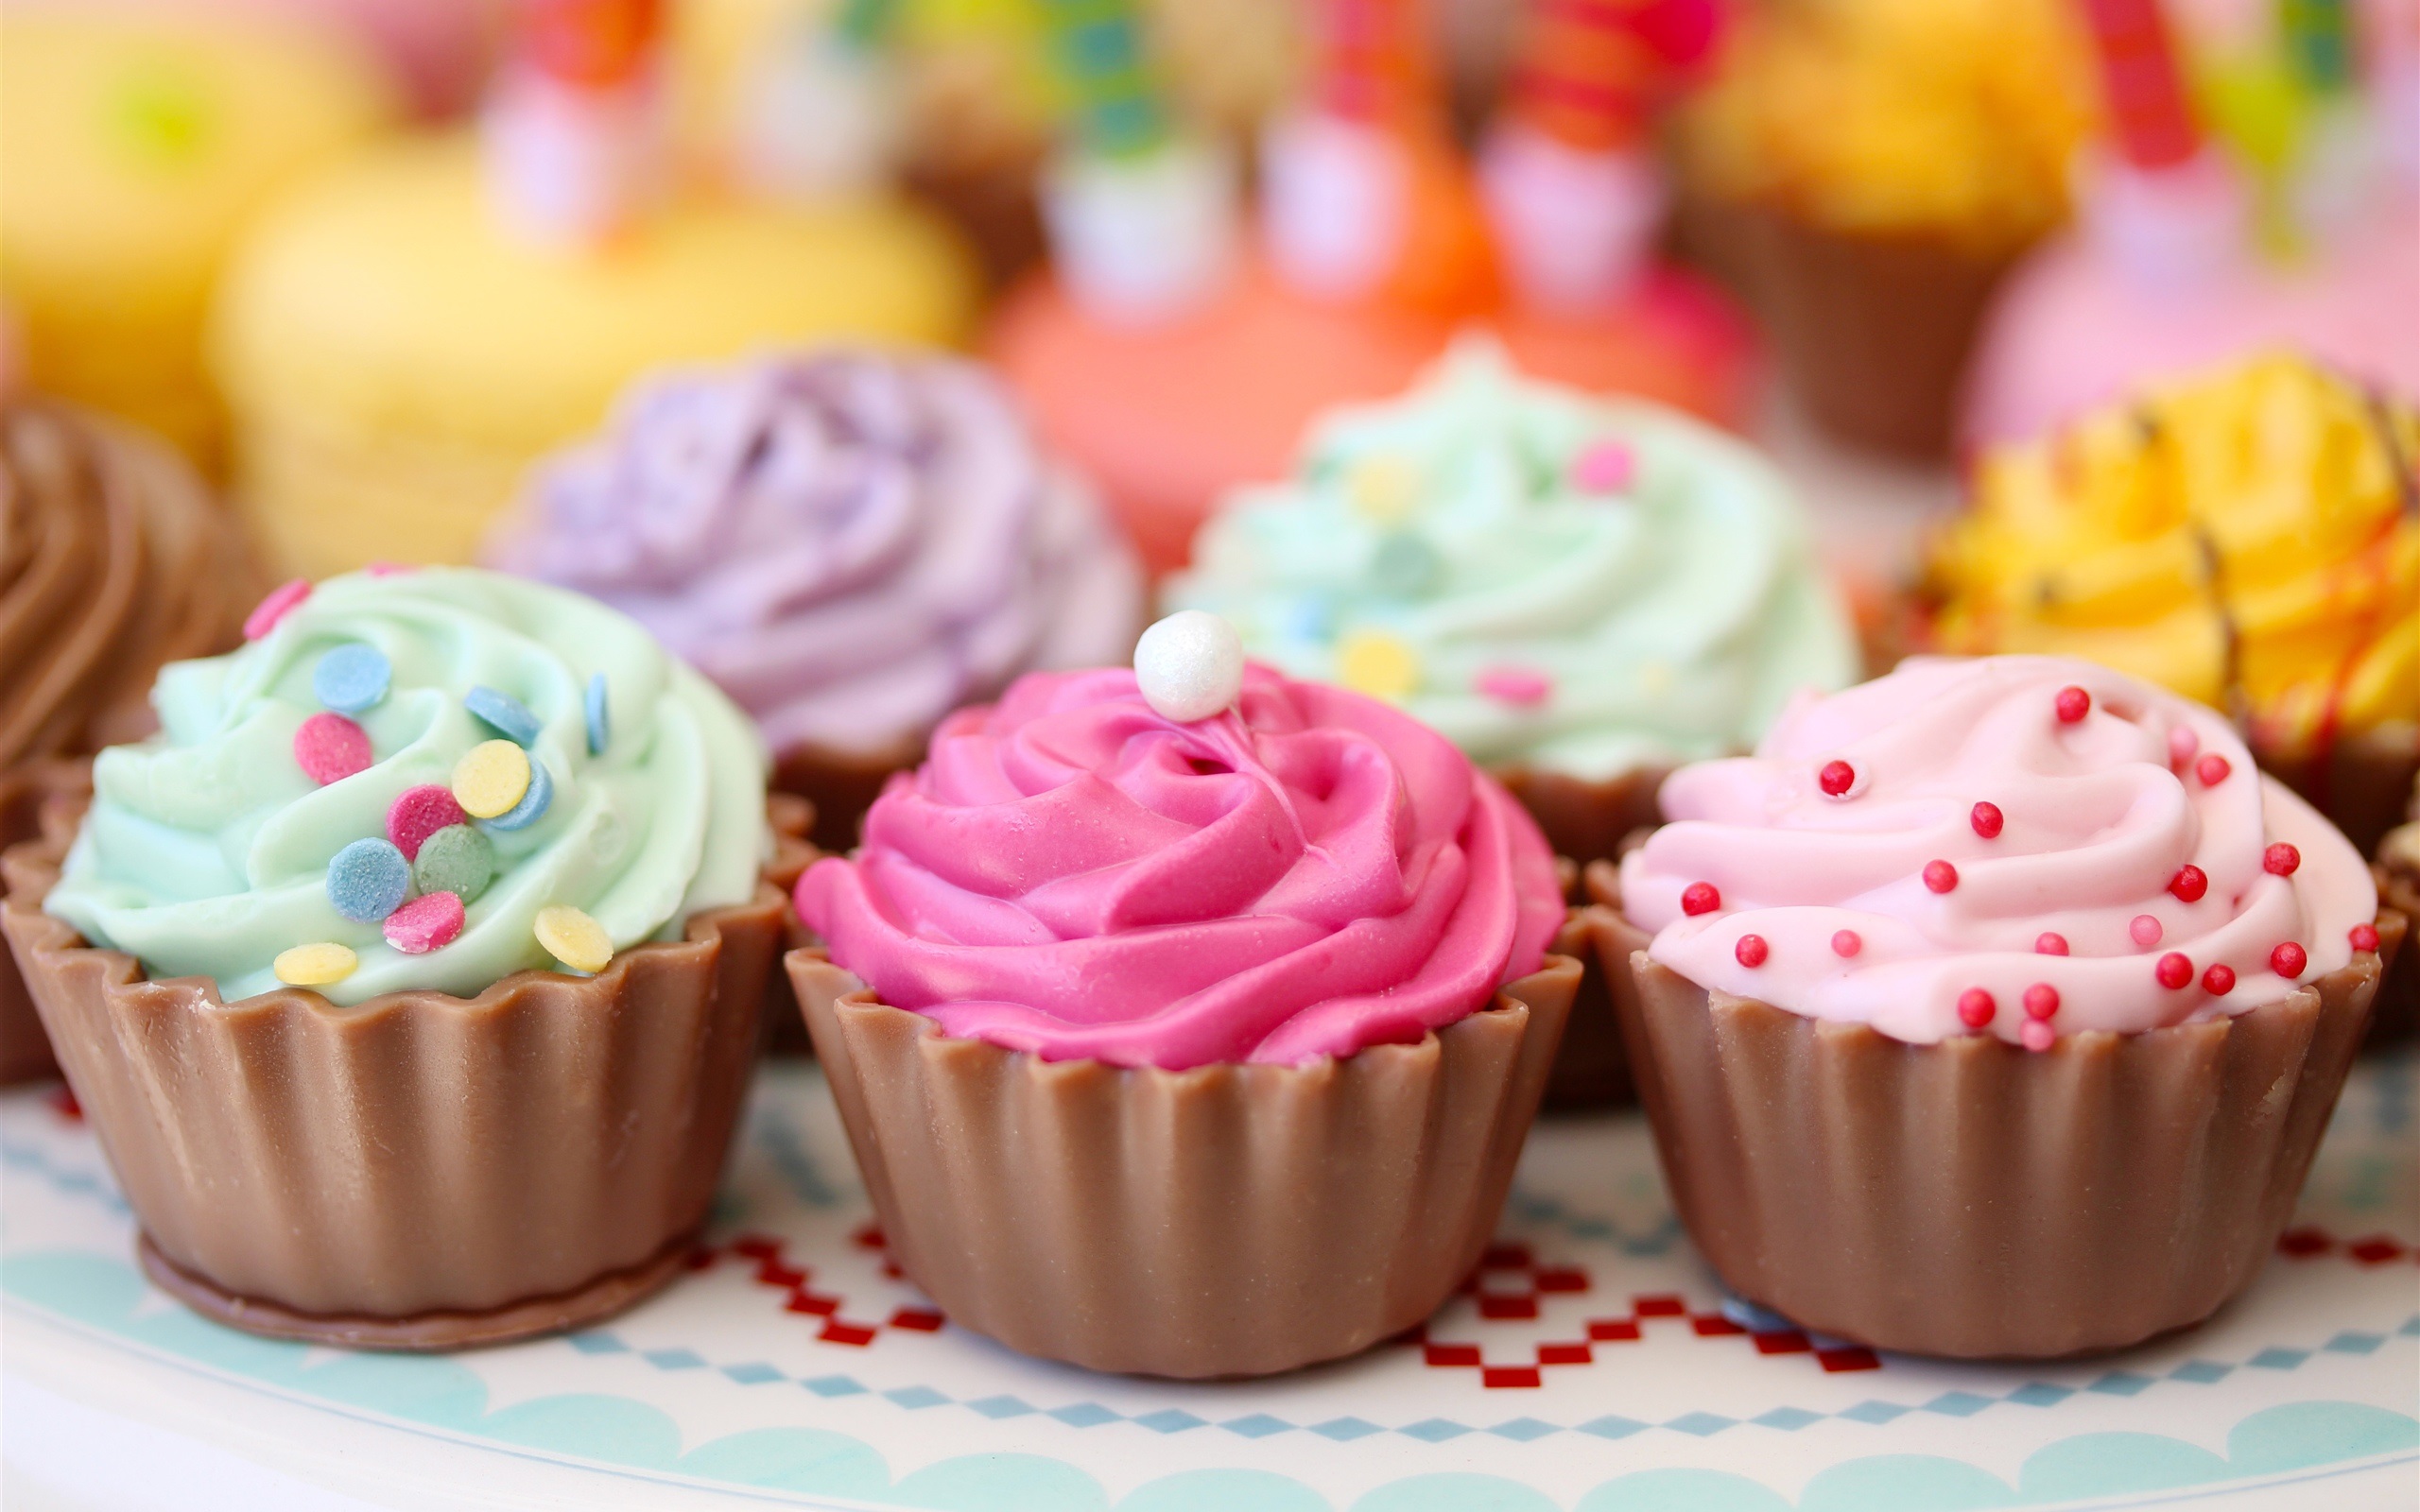 Colorful Cream Cakes Pastries Sweet Food Wallpaper Other